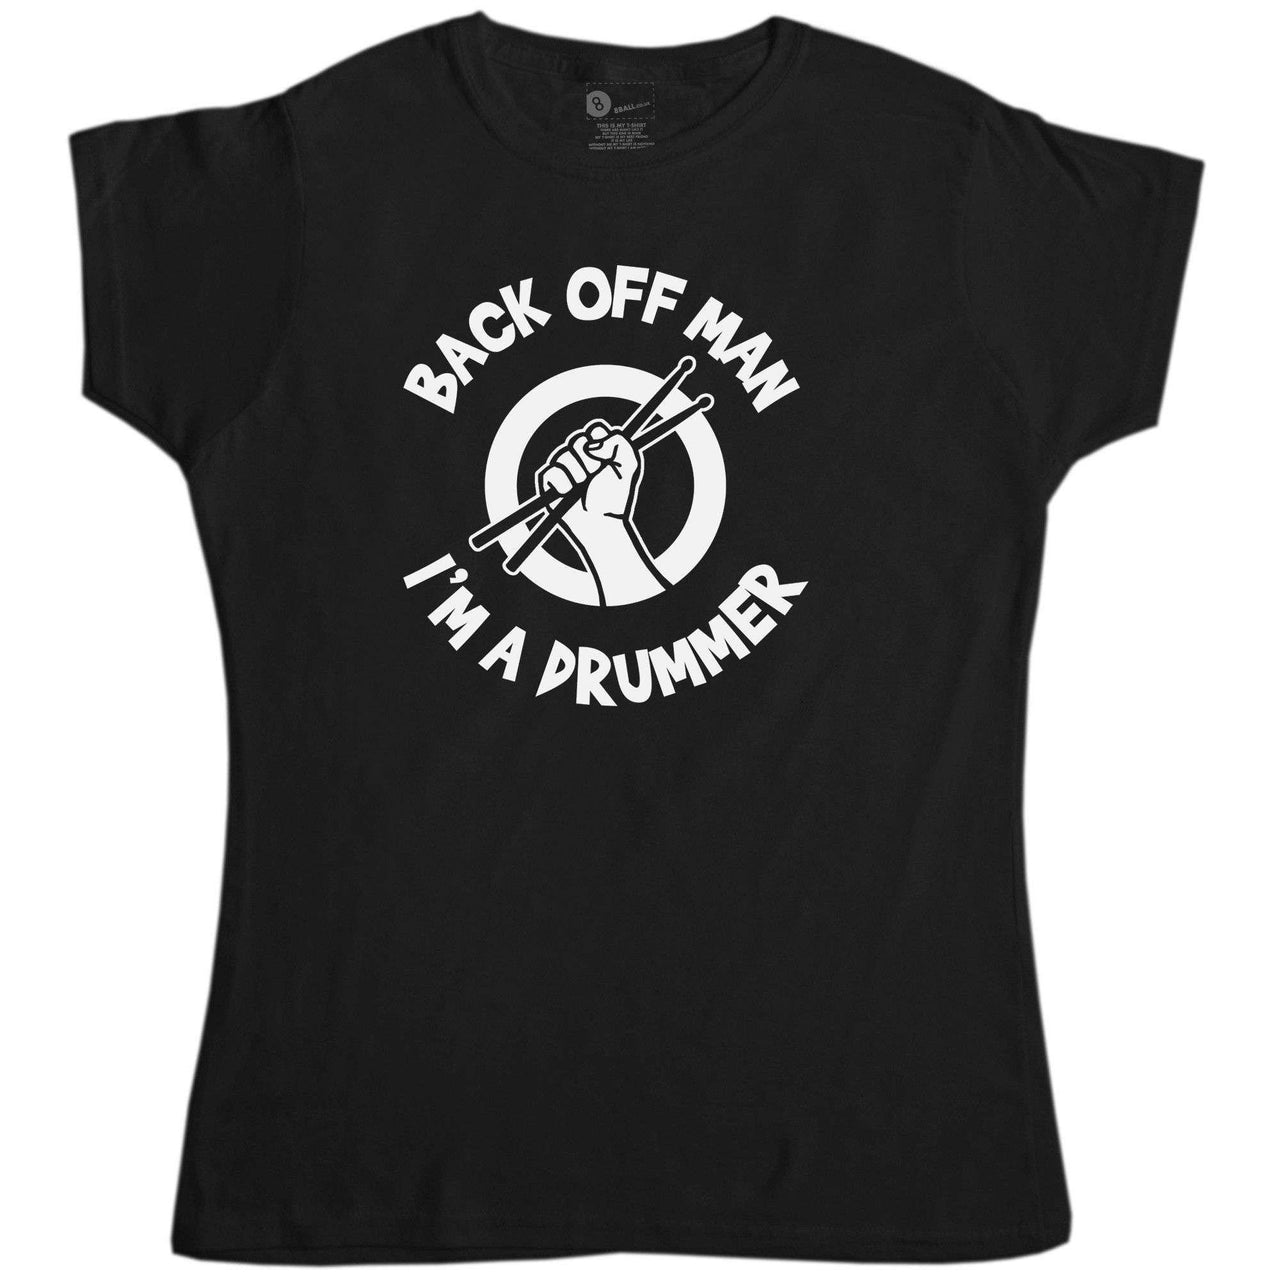 Back Off Man I'm A Drummer Funny T-Shirt for Women 8Ball